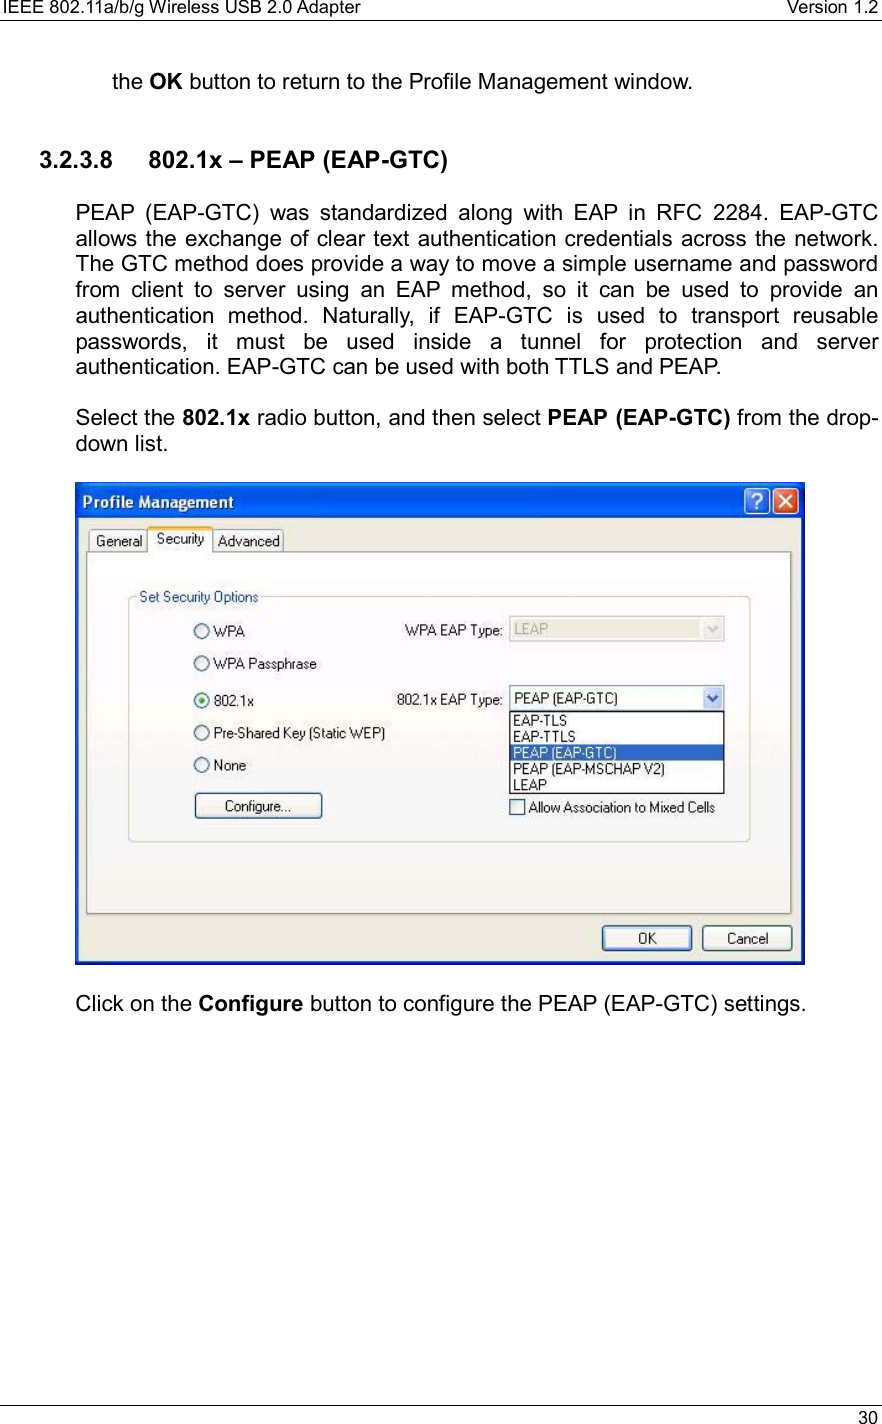 IEEE 802.11a/b/g Wireless USB 2.0 Adapter    Version 1.2   30  the OK button to return to the Profile Management window.     3.2.3.8  802.1x – PEAP (EAP-GTC)  PEAP (EAP-GTC) was standardized along with EAP in RFC 2284. EAP-GTC allows the exchange of clear text authentication credentials across the network. The GTC method does provide a way to move a simple username and password from client to server using an EAP method, so it can be used to provide an authentication method. Naturally, if EAP-GTC is used to transport reusable passwords, it must be used inside a tunnel for protection and server authentication. EAP-GTC can be used with both TTLS and PEAP.  Select the 802.1x radio button, and then select PEAP (EAP-GTC) from the drop-down list.     Click on the Configure button to configure the PEAP (EAP-GTC) settings.   